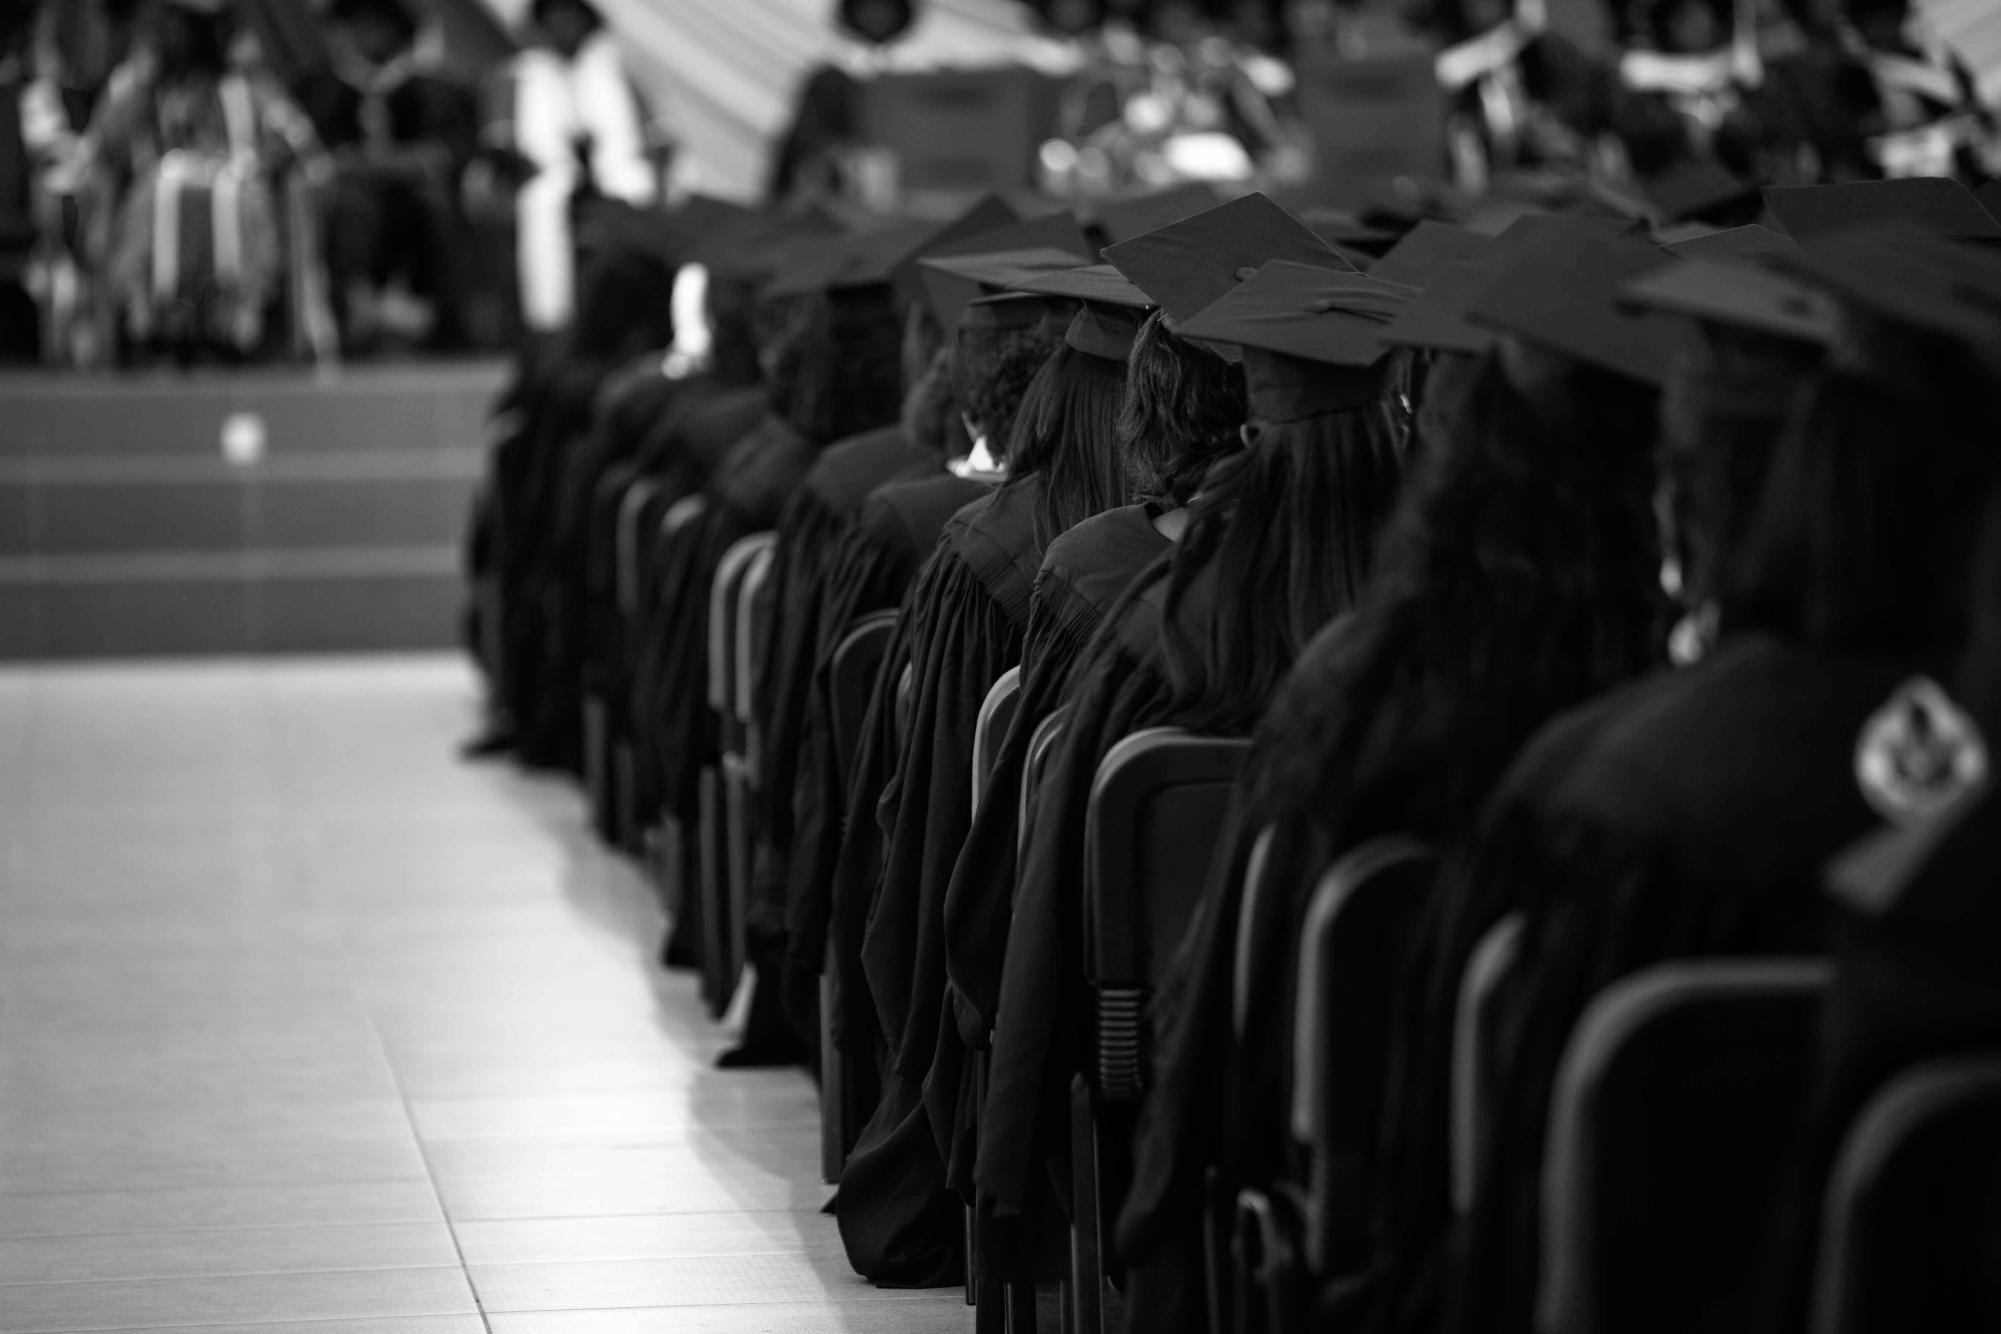 Graduation parties come in a variety of formats. Some are for close family members while others are for multiple friends. Photo used with permission from Emmanuel Offei on Unsplash